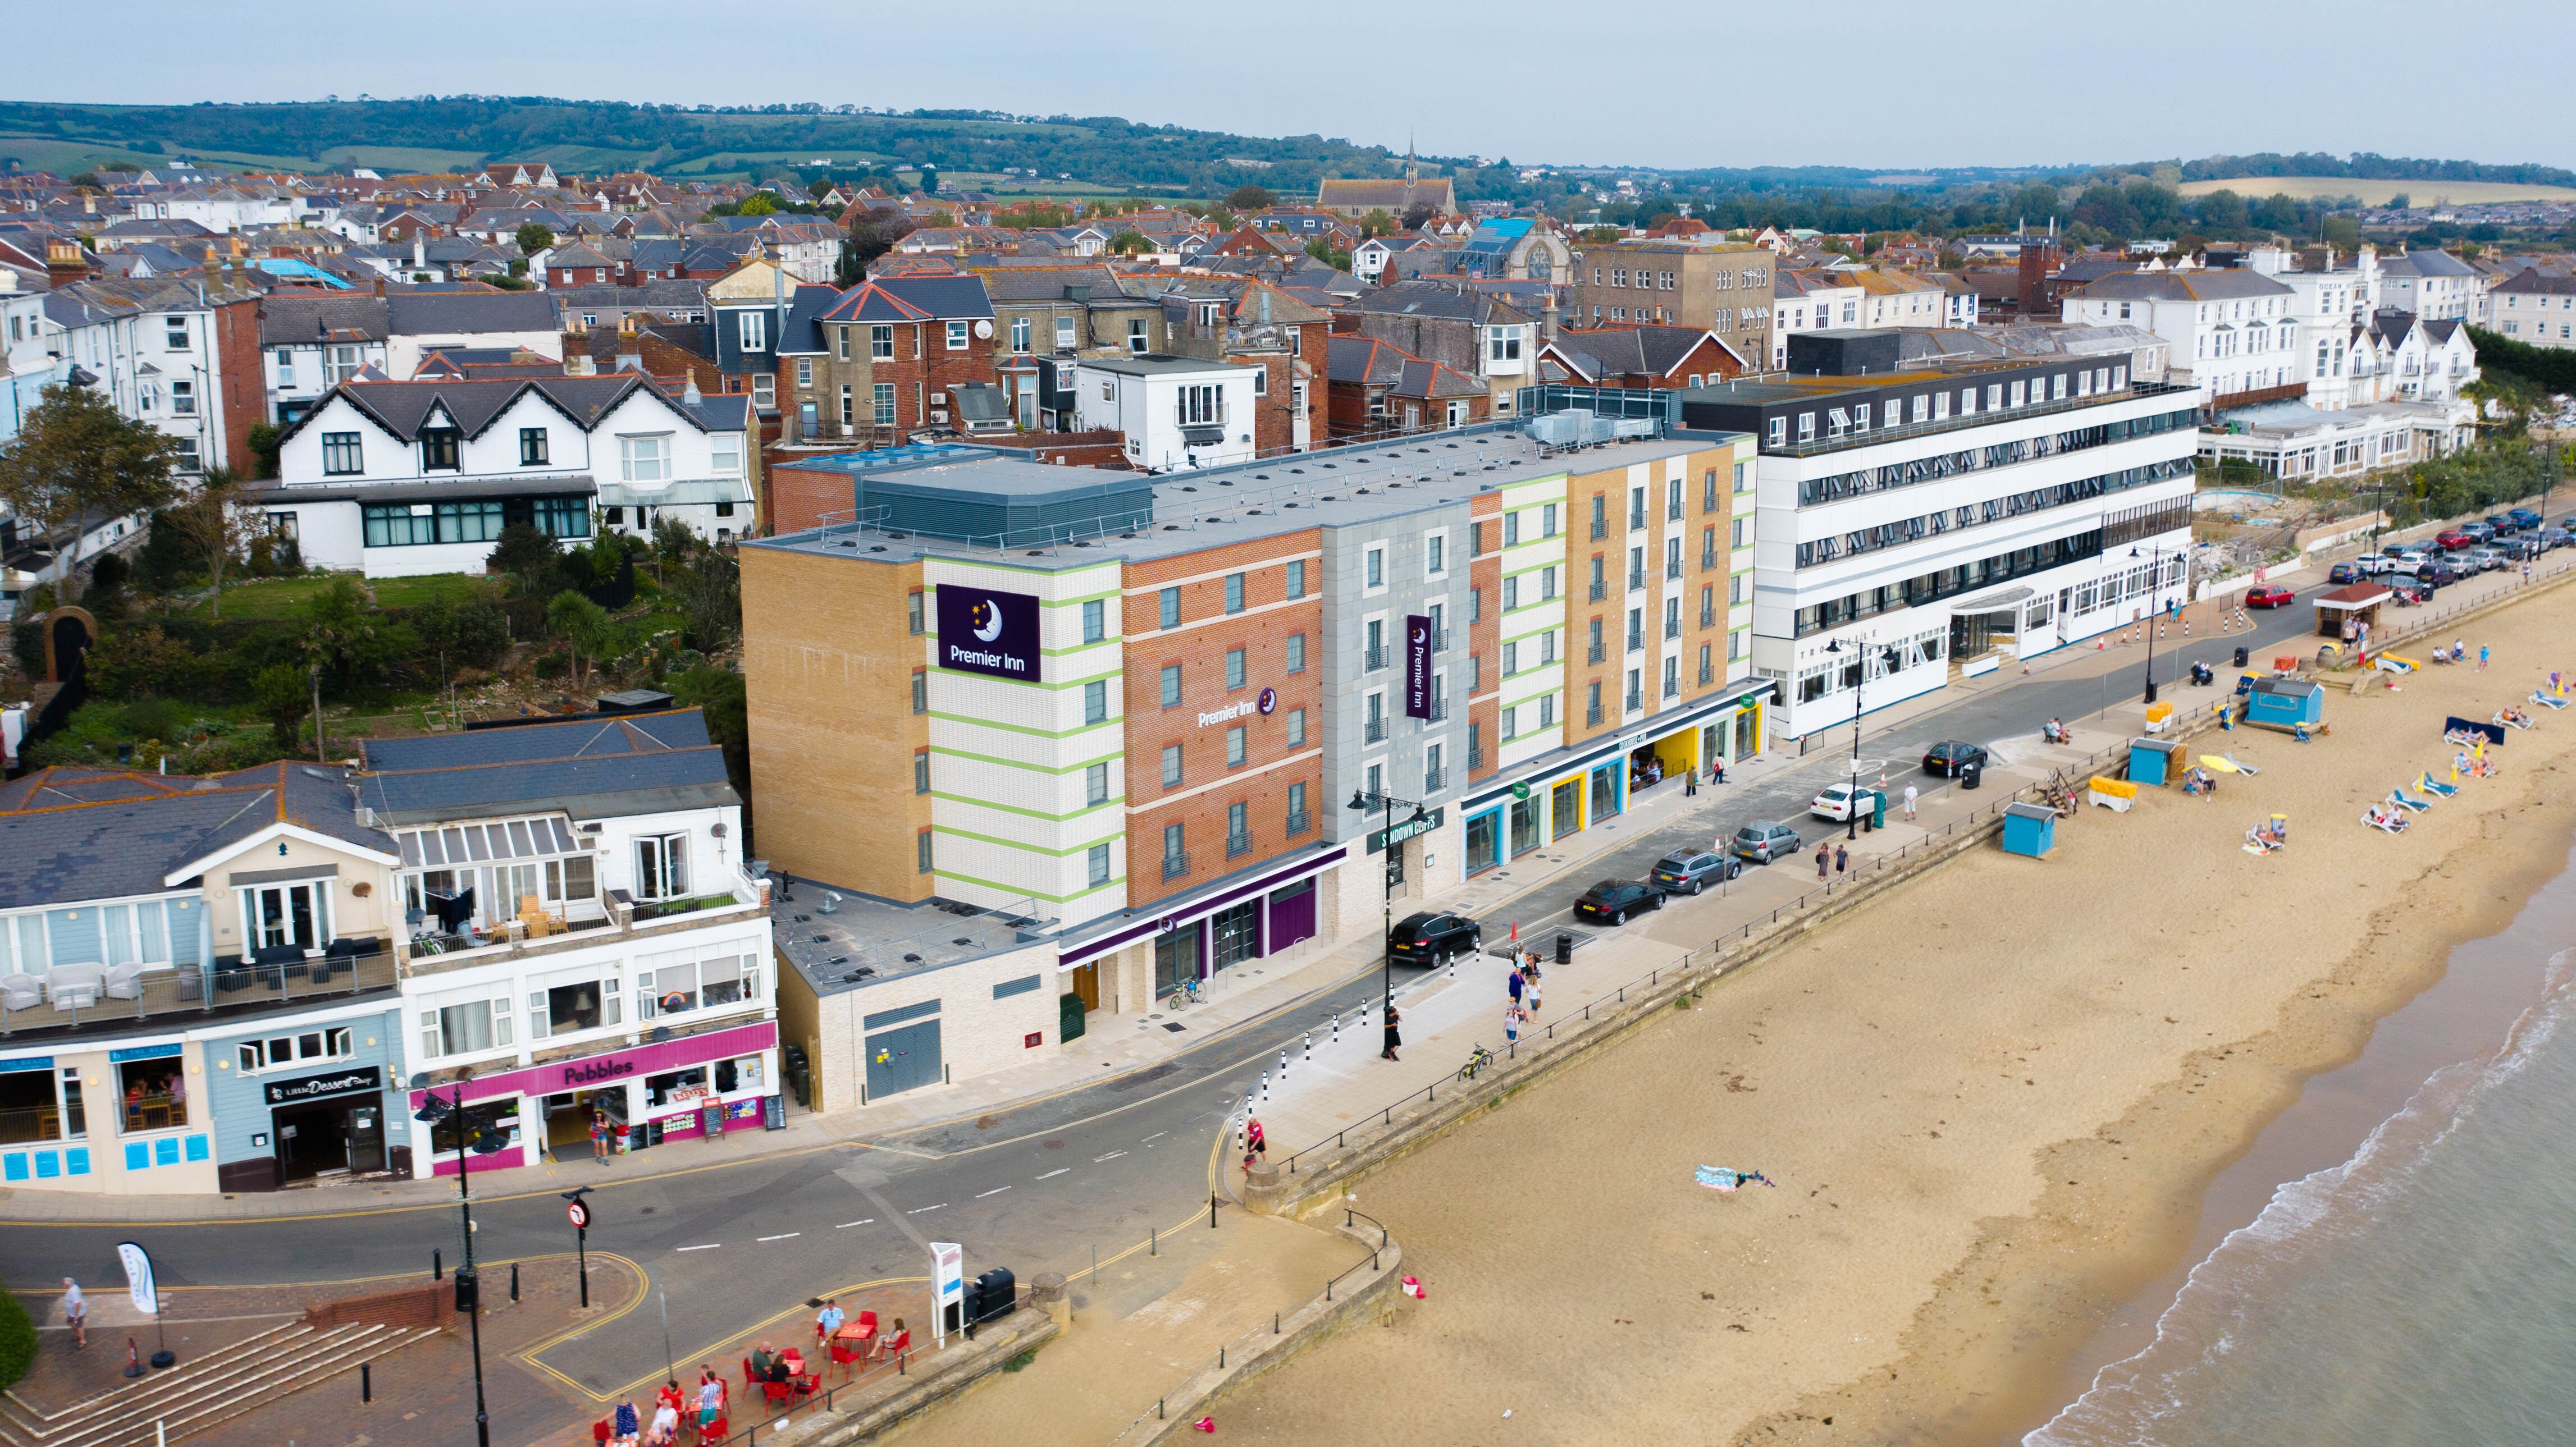 Premier Inn prepares for summer staycation boom with 545 new rooms in seaside locations 